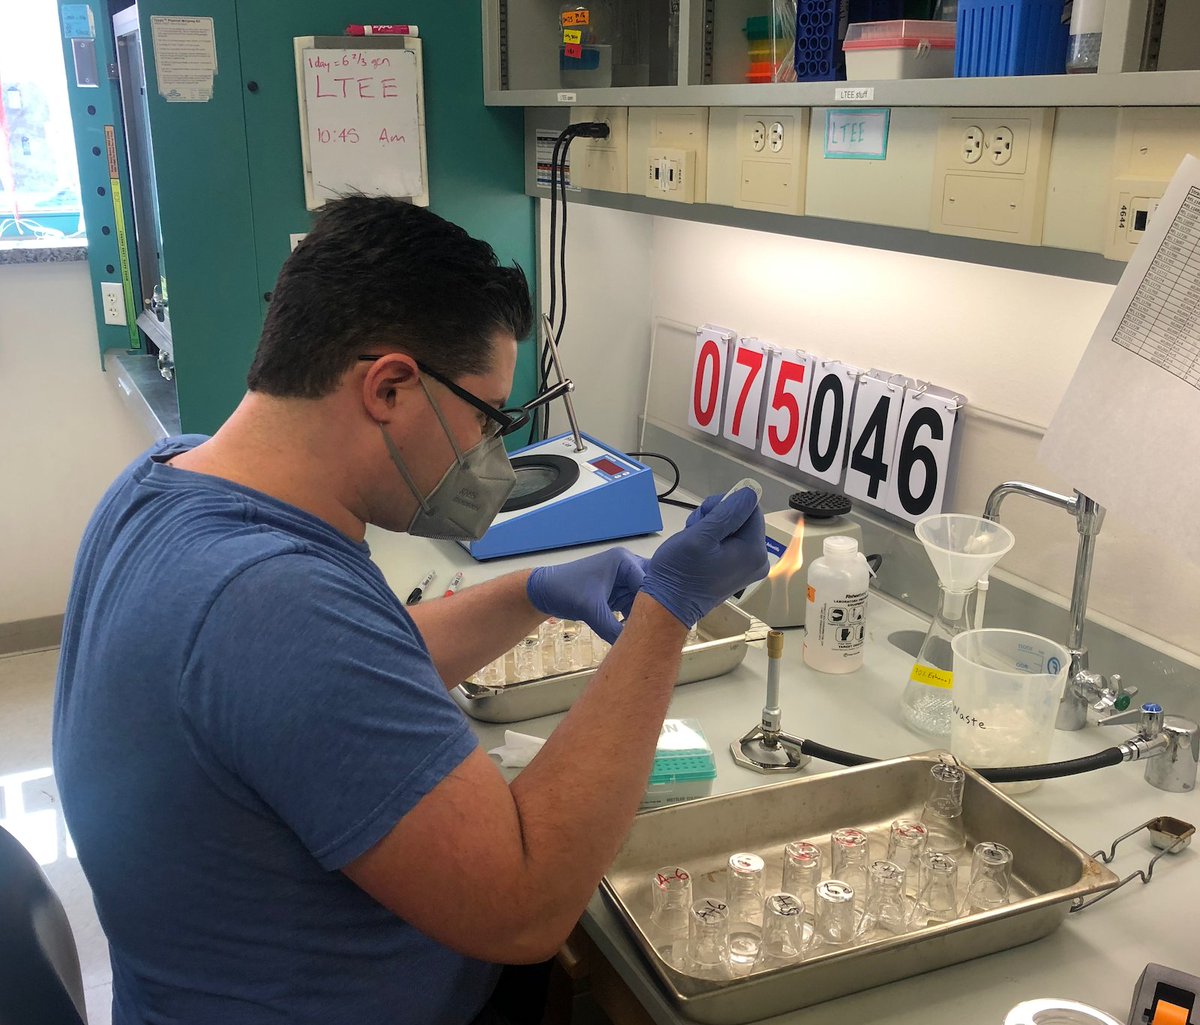 This week Emmanuel Chavarria and Isaac Gifford performed their first #LTEE transfers. Isaac will be coming in to keep the E. coli evolving on the July 4th holiday.